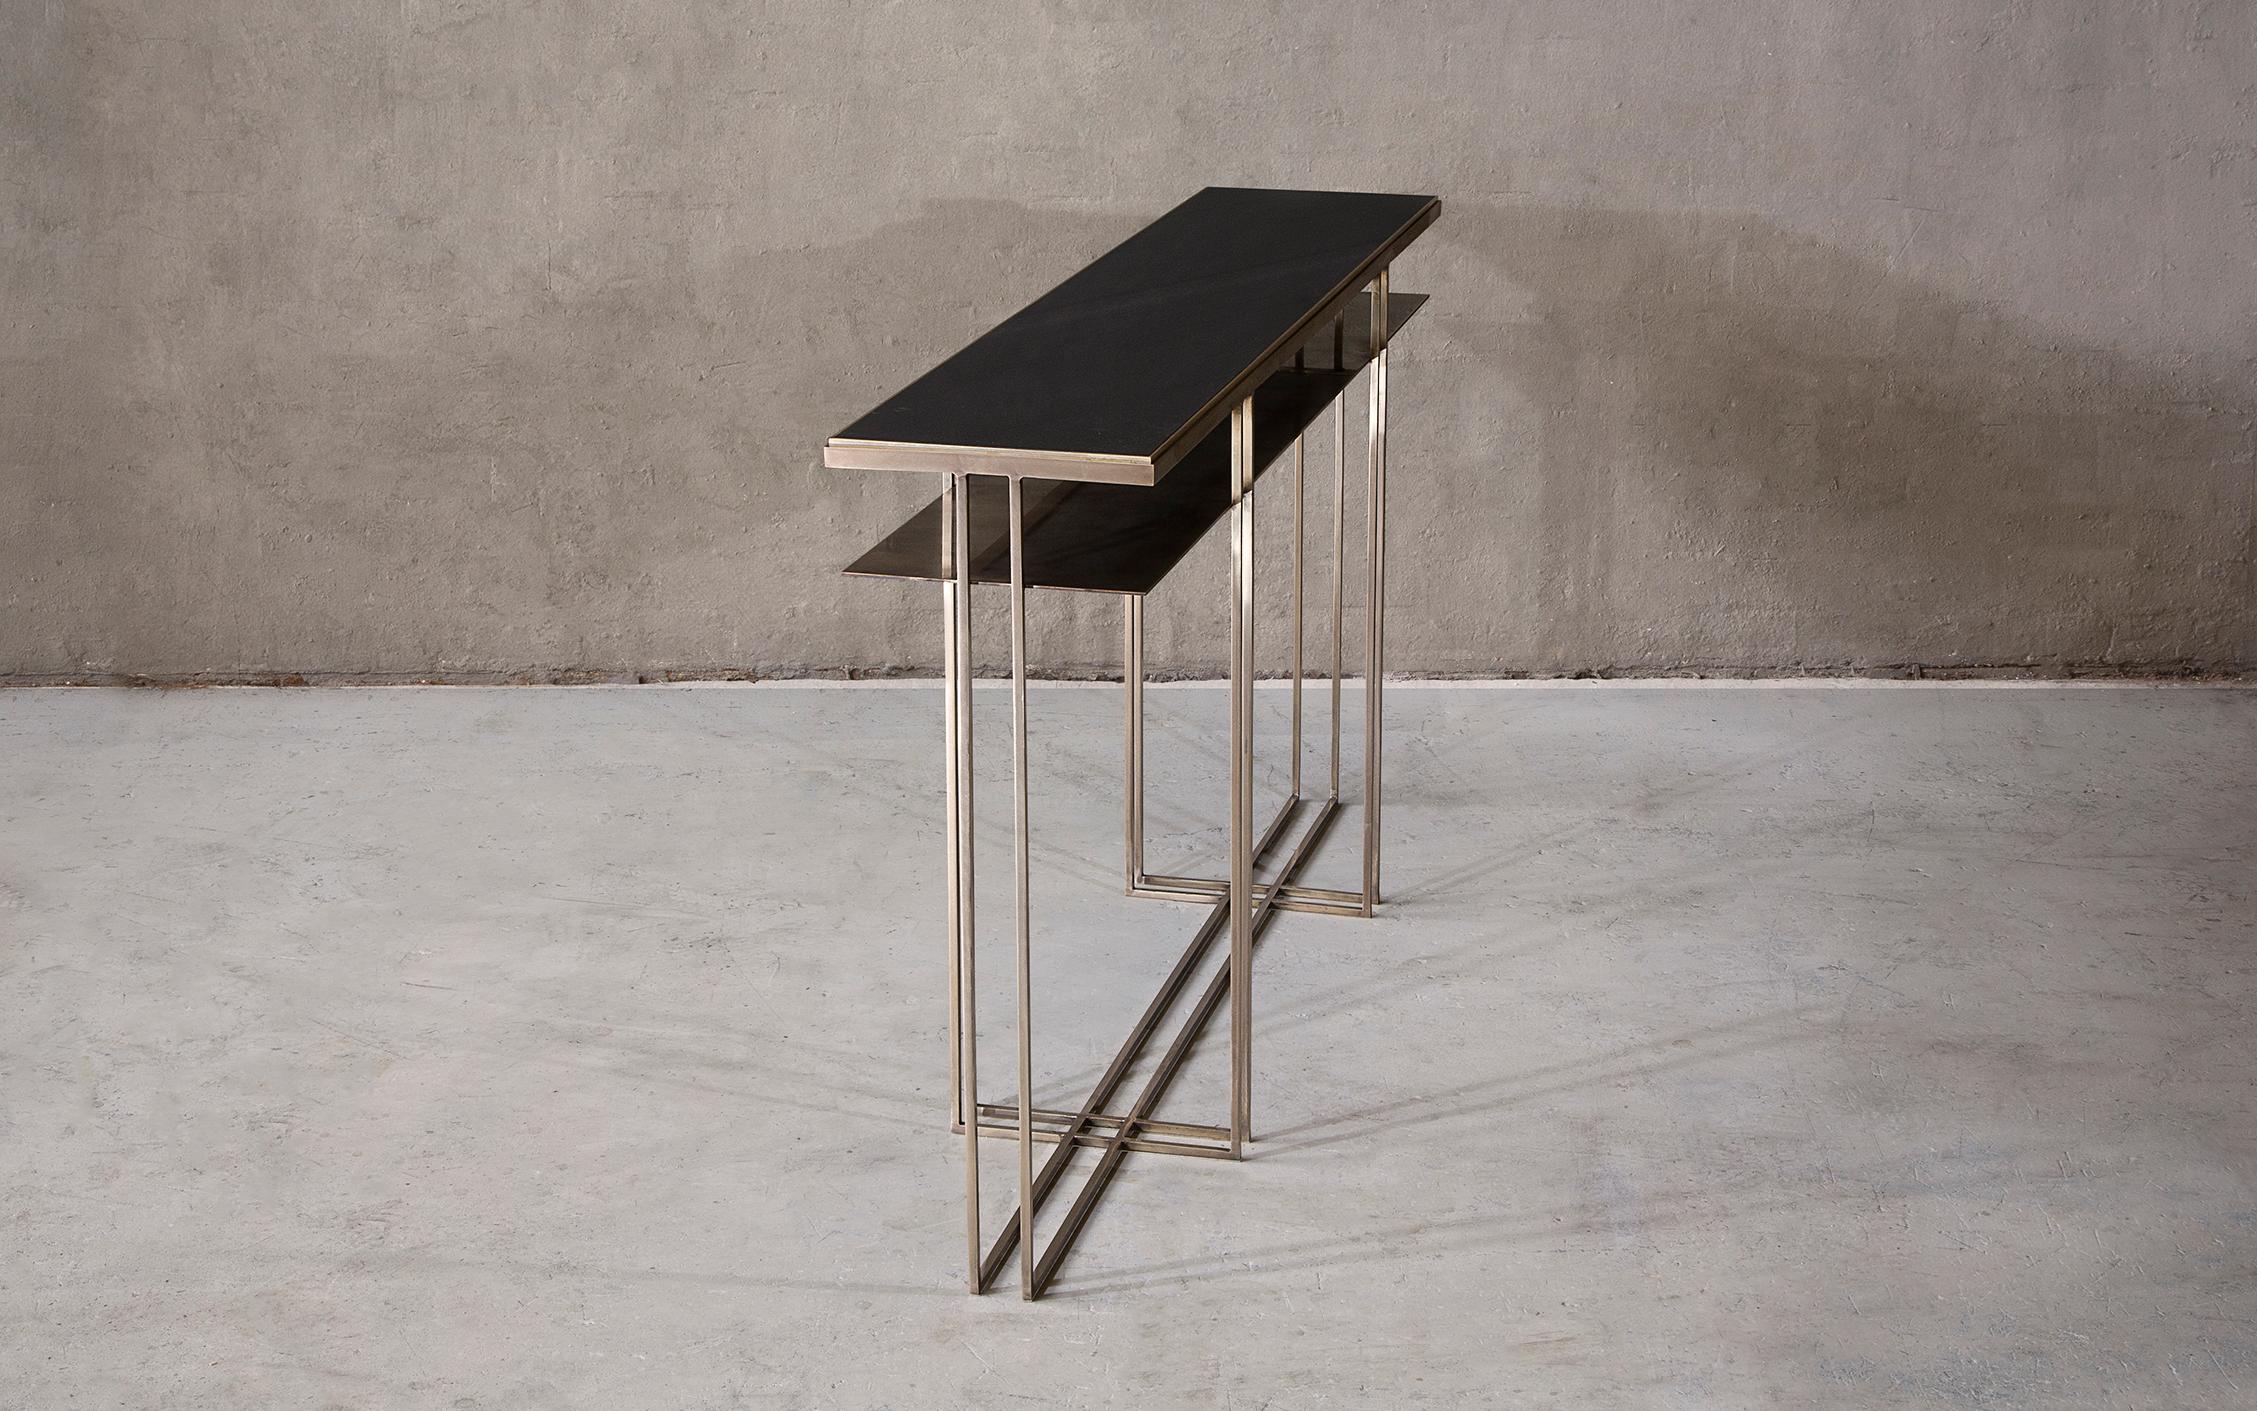 Brass and slate handcrafted console signed by Novocastrian
A console table in polished brass and honed Cumbrian slate. Handcrafted to order in the North East England. Custom sizes and finishes are available.
Measures: 150cm (length) x 30cm (width)